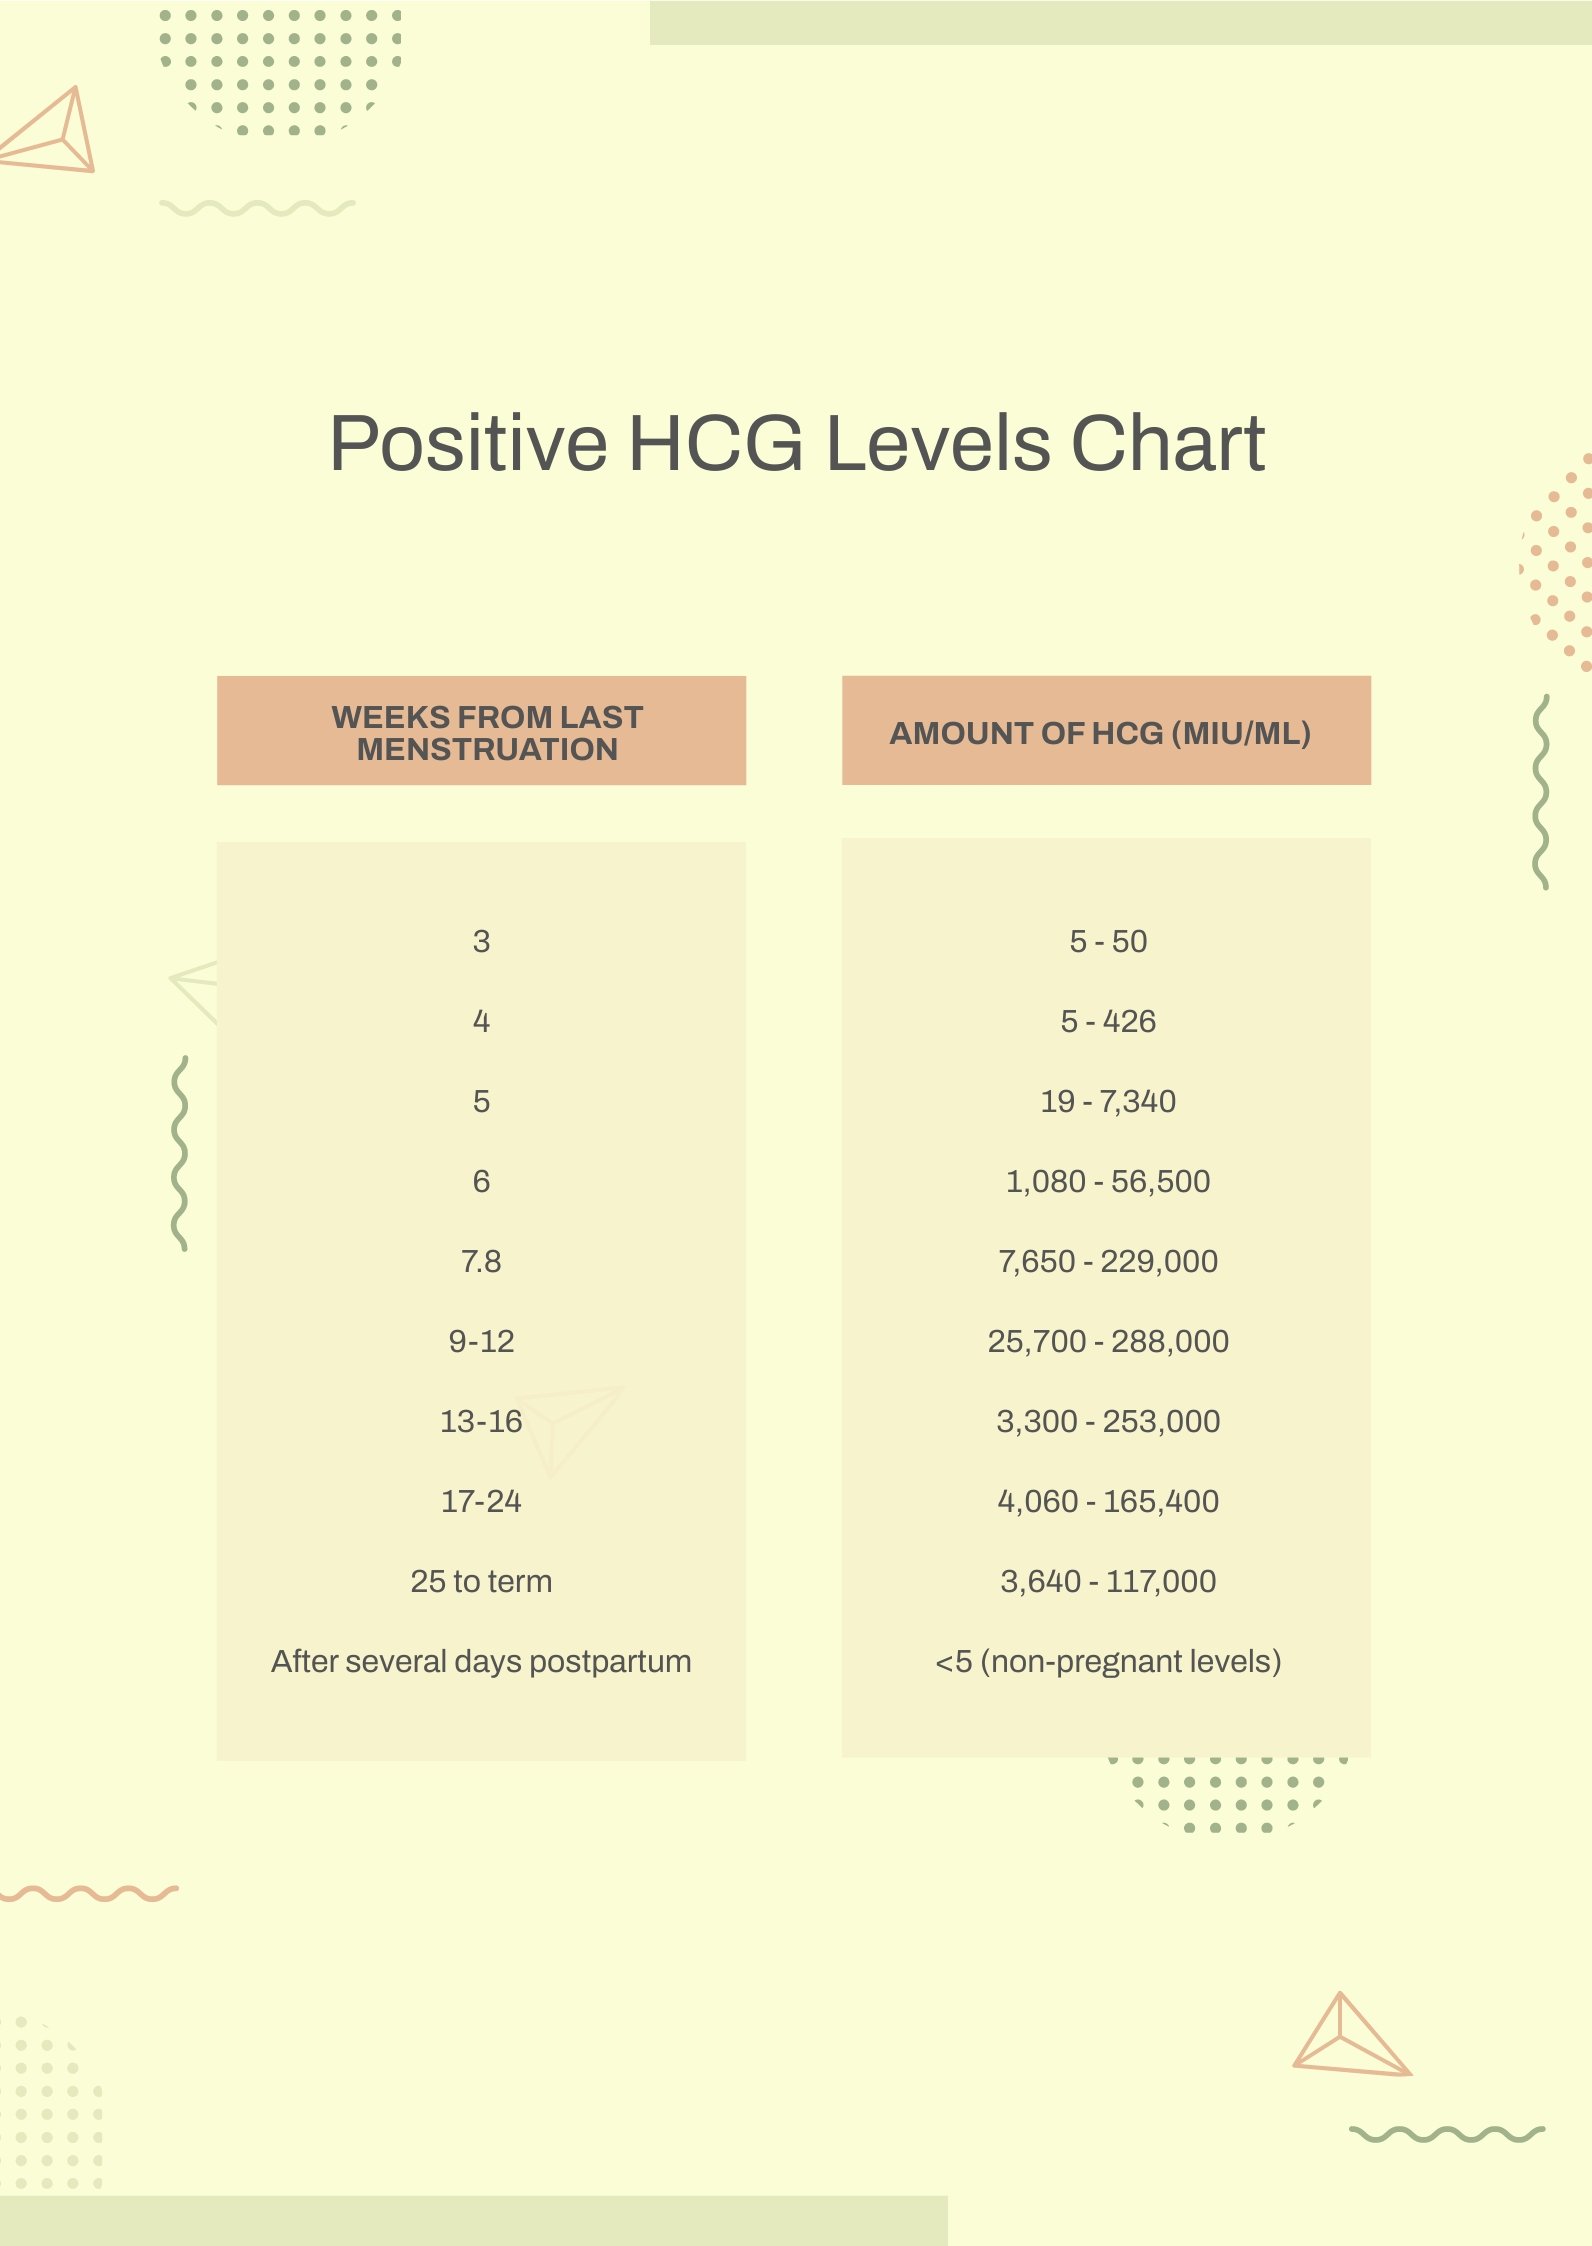 Positive HCG Levels Chart in PDF